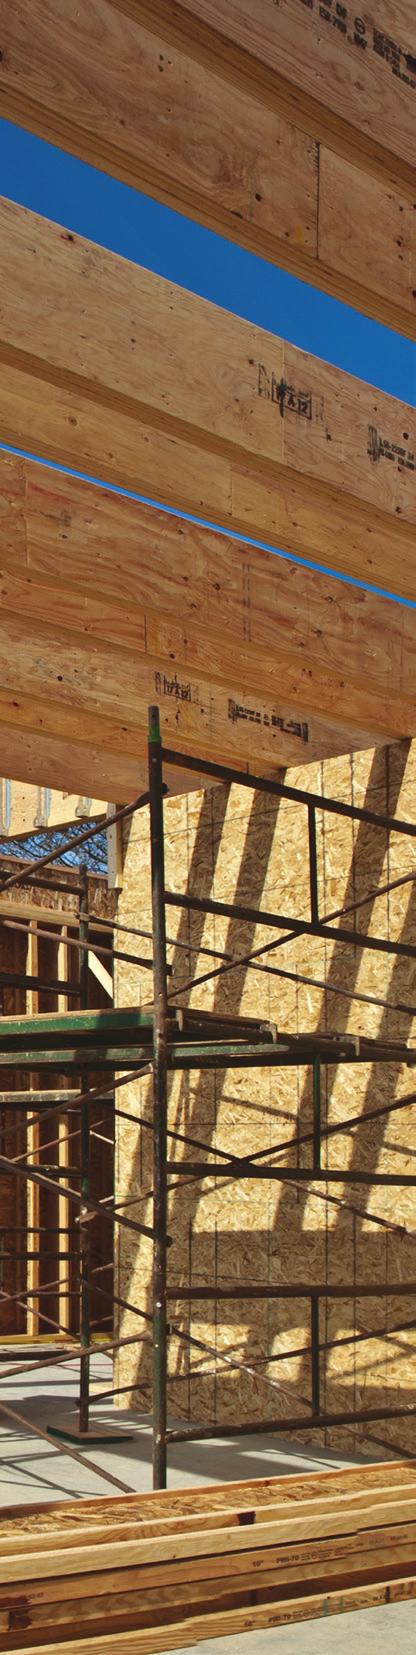 PWLVL DIMENSION LAMINATED VENEER LUMBER ENGINEERED FOR STRUCTURAL FRAMING Extra-long PWLVL Dimension wall and floor framing offers a stronger, stiffer, and straighter product than dimension lumber